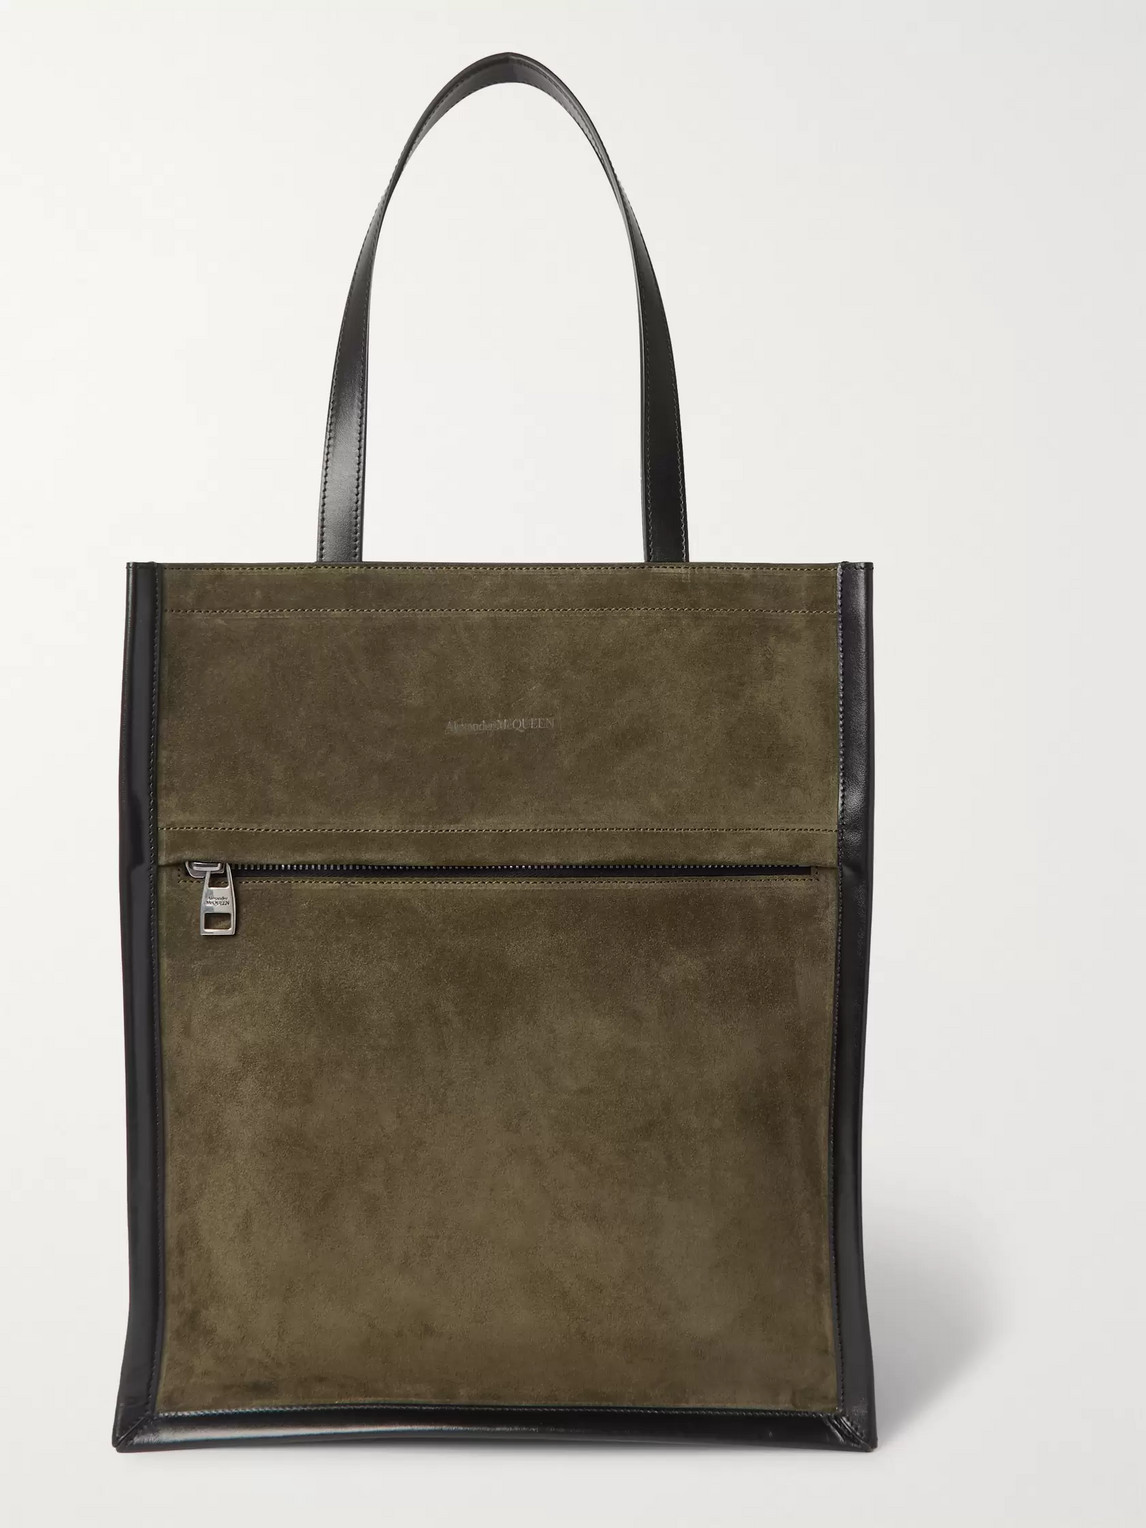 ALEXANDER MCQUEEN LEATHER-TRIMMED SUEDE TOTE BAG